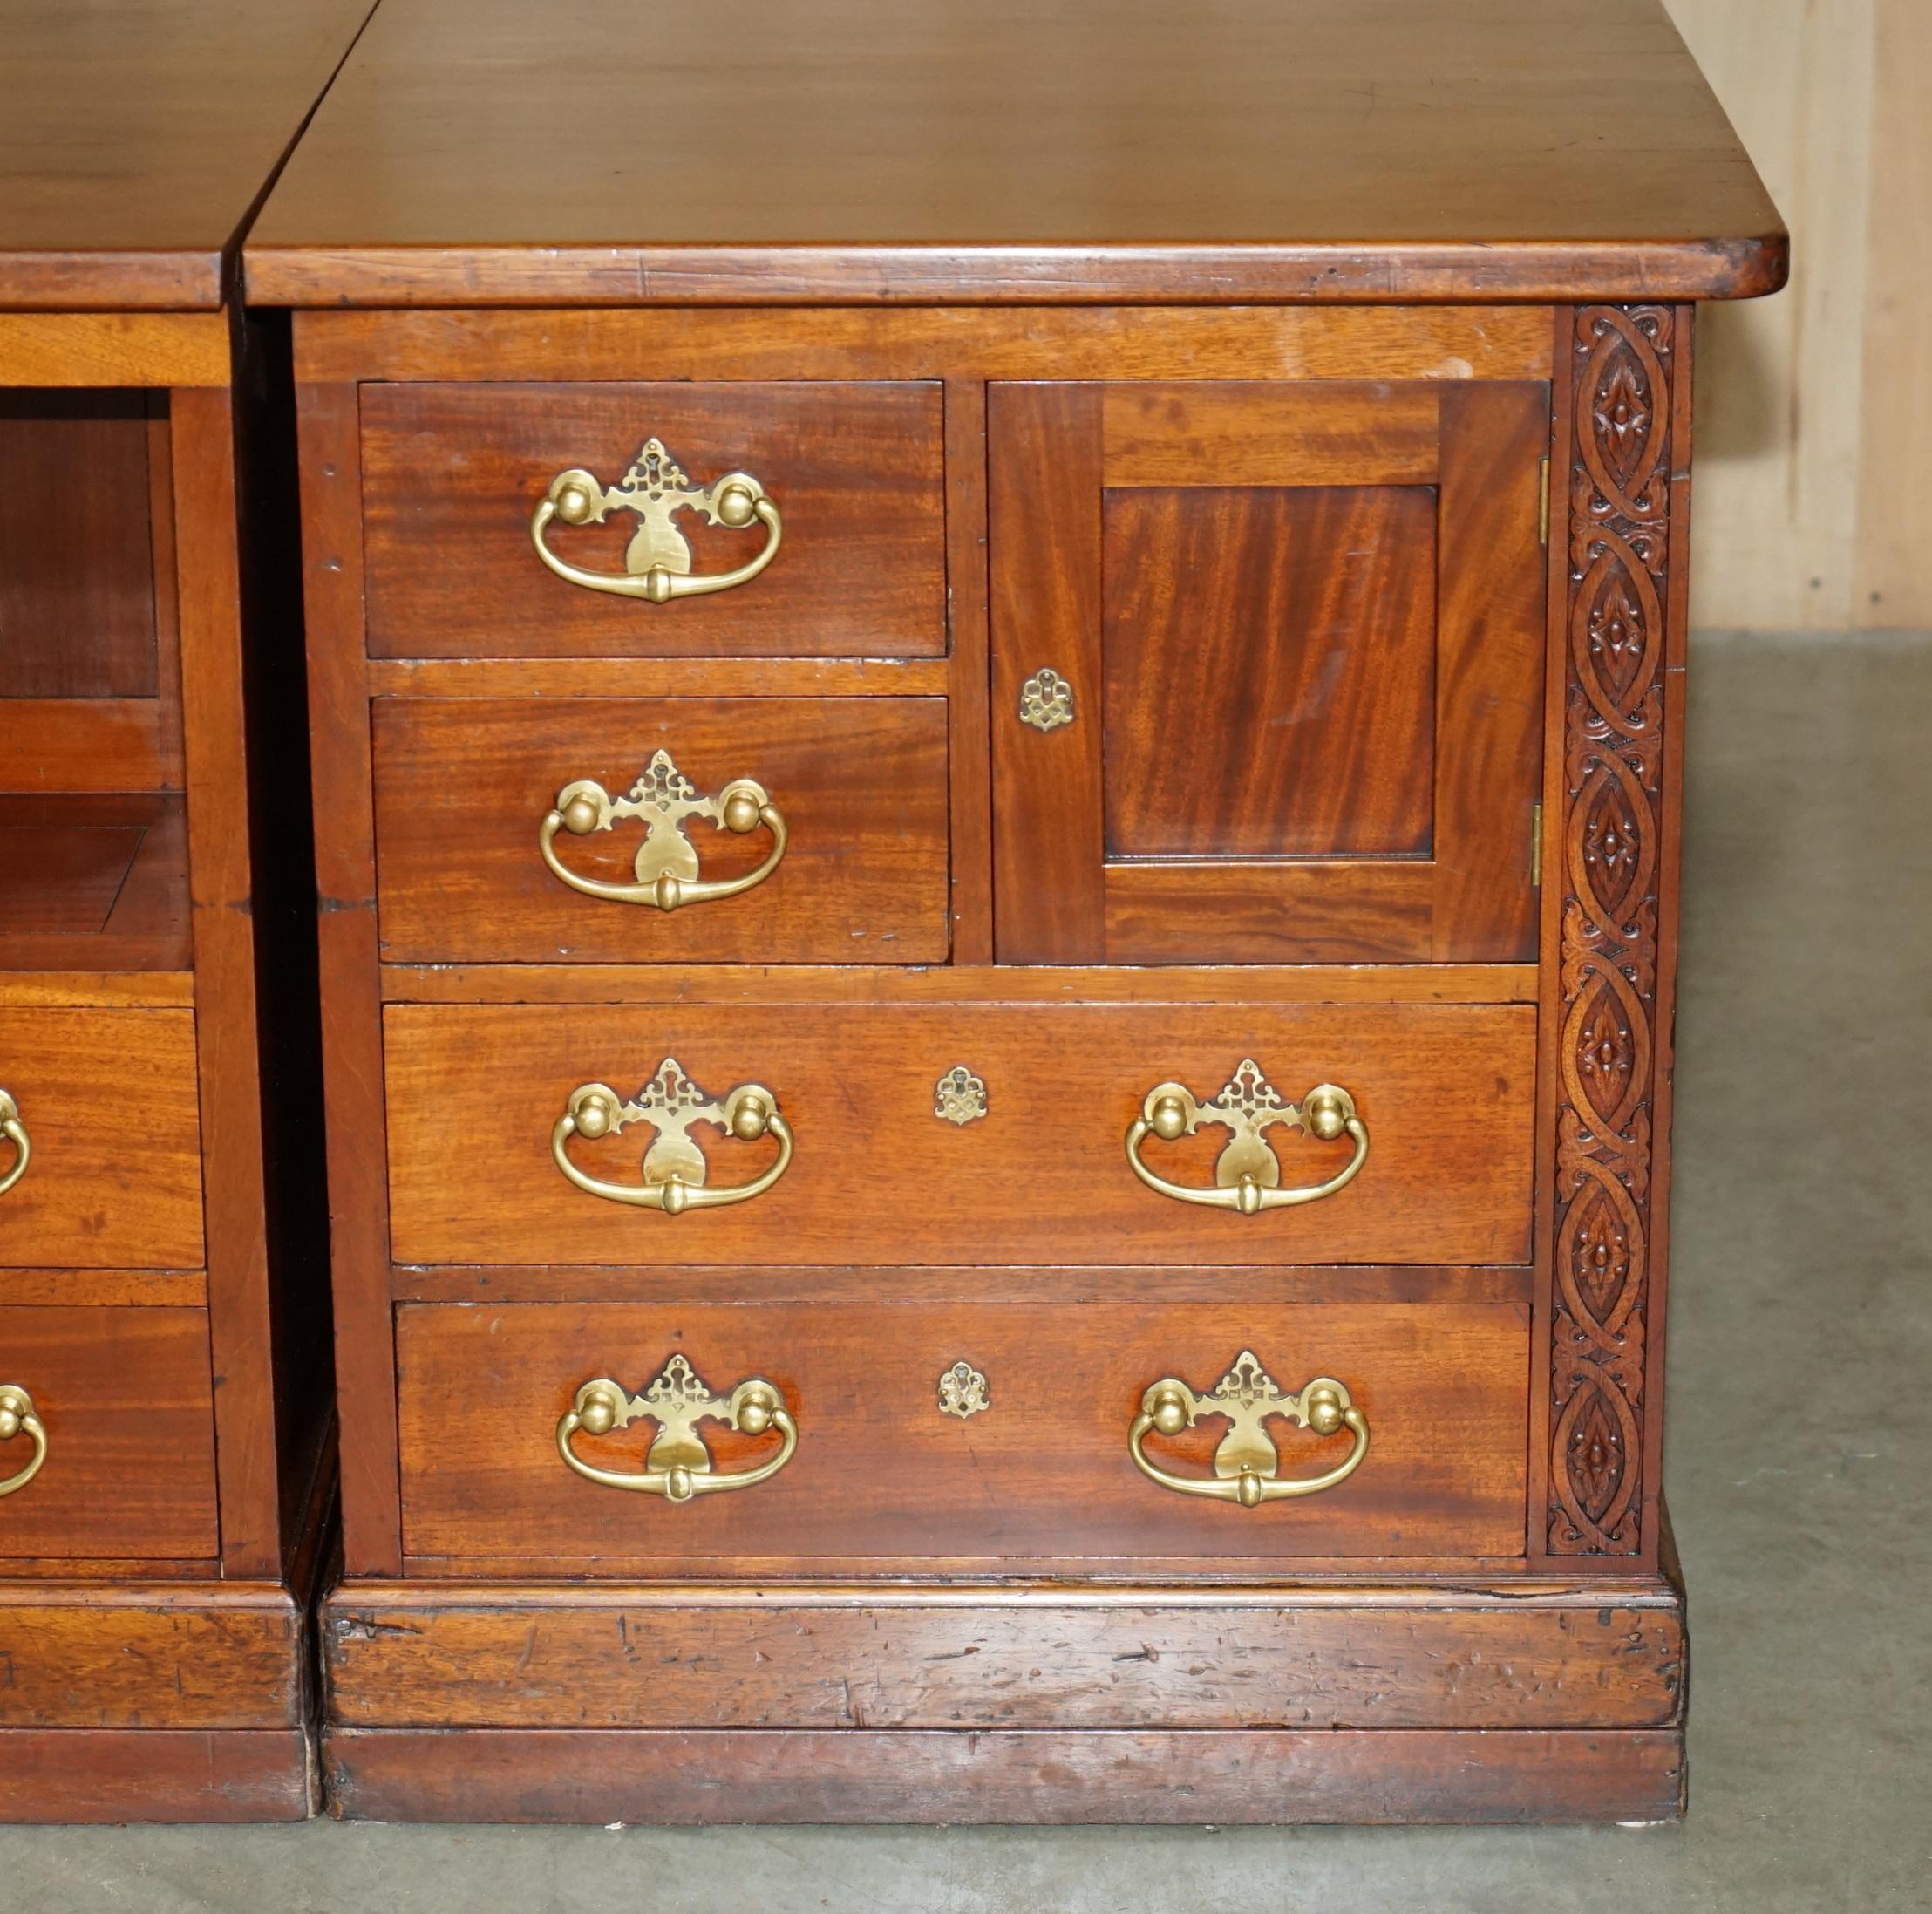 RIESIGE ANTIQUE VICTORIAN THOMAS CHIPPENDALE ESTATE DESK OR TWO SIDEBOARD DRAWERs (Hartholz) im Angebot